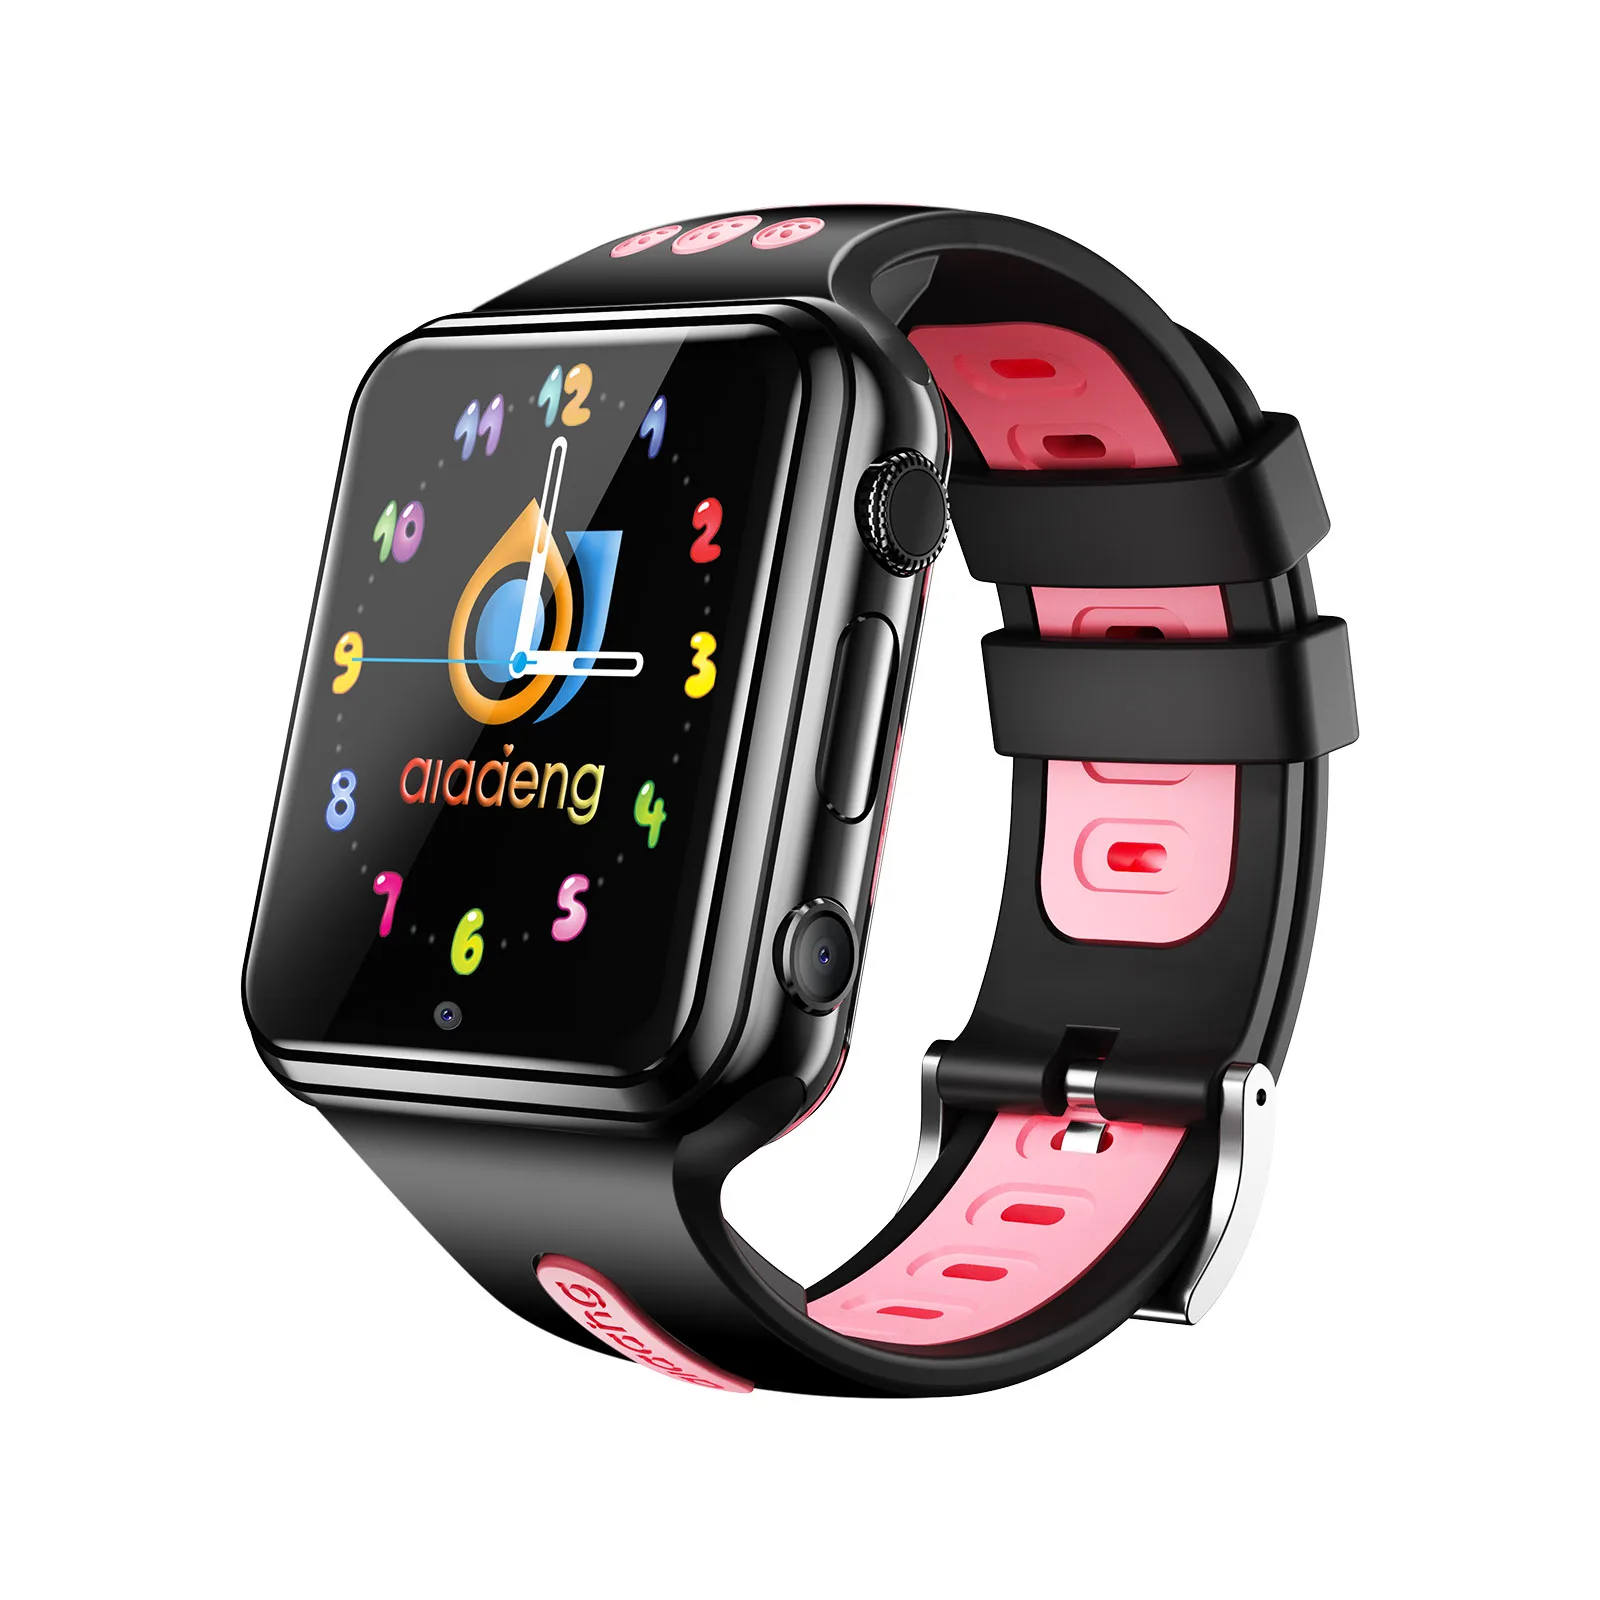 

4G Smart Watch GPS WiFi LBS Multiple-Positioning Quad-Core Processor 1G+8G Dual Camera APP Download/Scientific/Step Counting